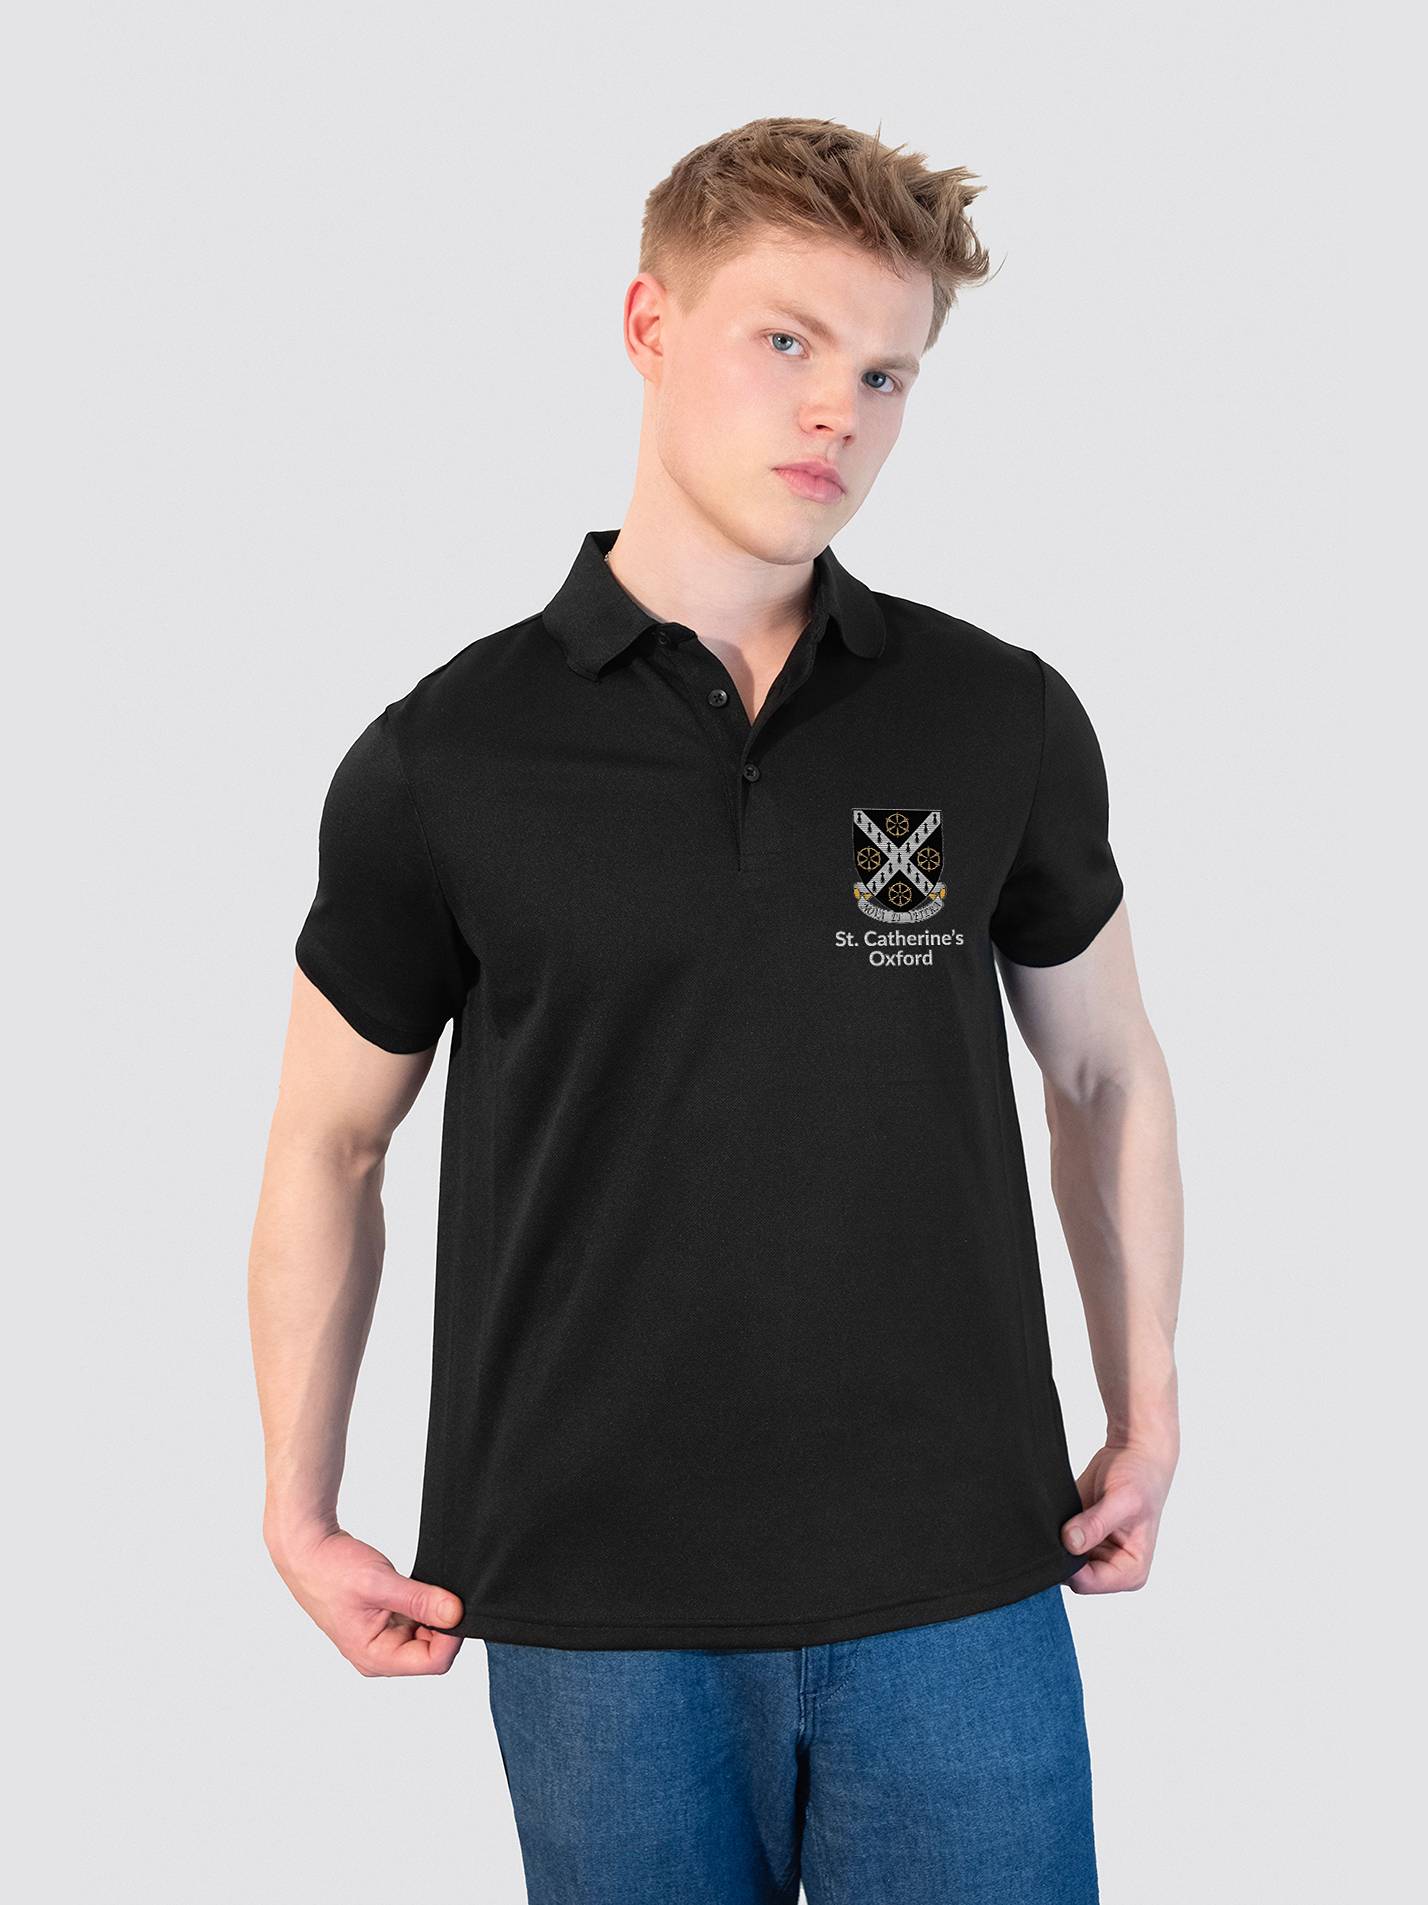 St Catherine's College Oxford MCR Sustainable Men's Polo Shirt